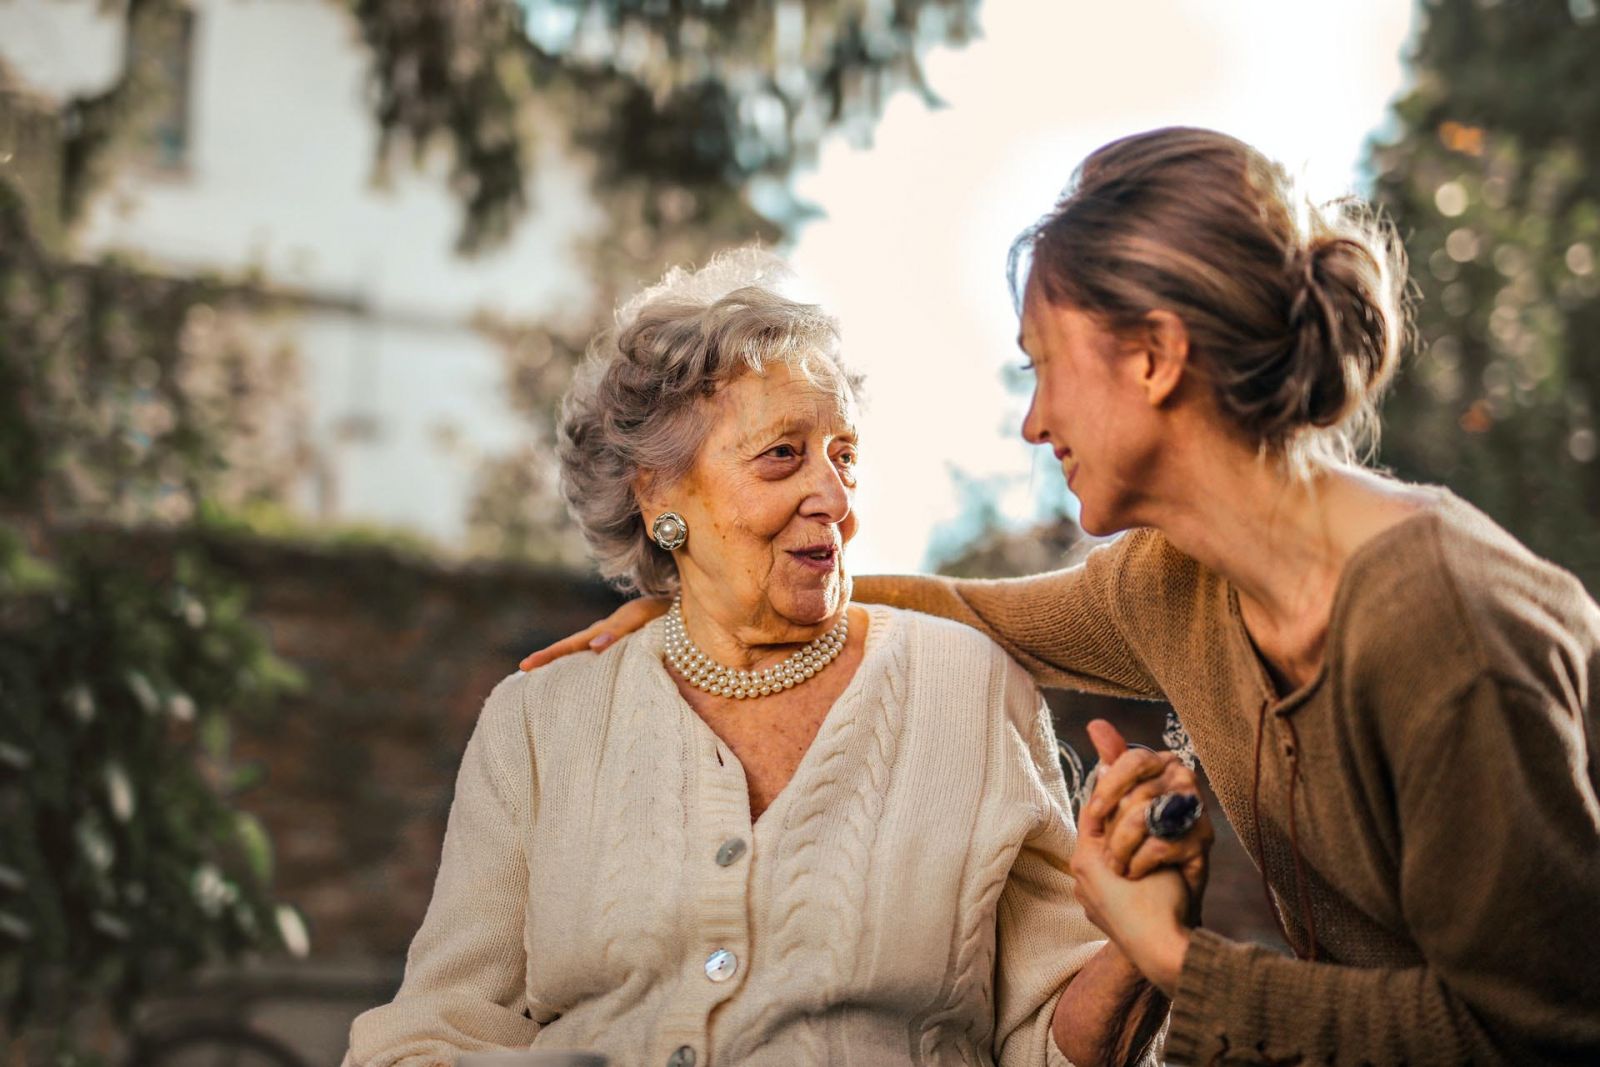 An elderly woman smiling while speaking with a loved one